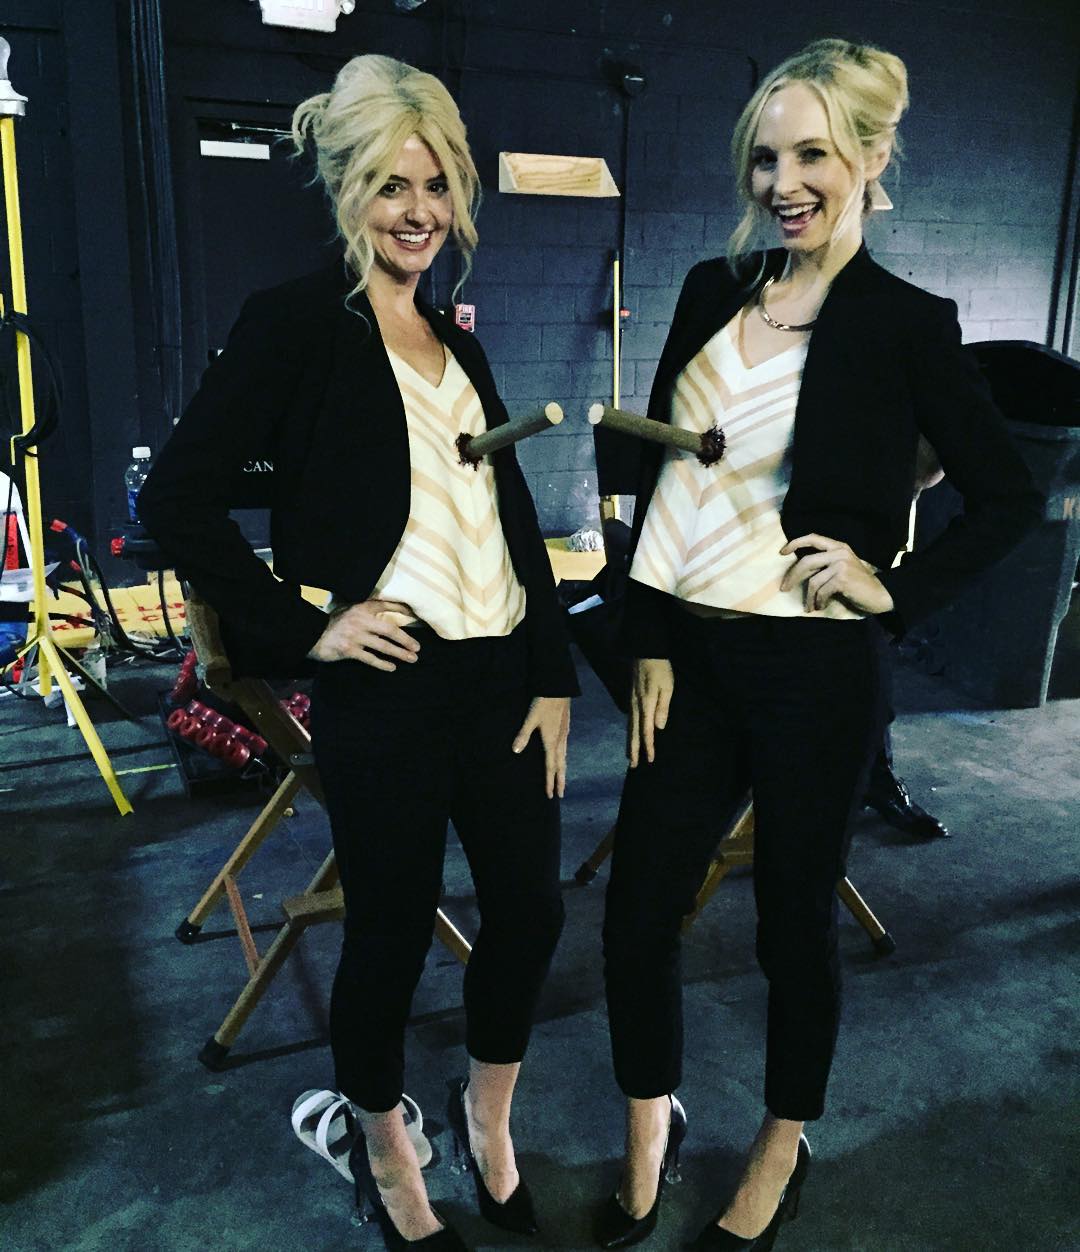 Image 2015 10 30 Candice King Instagram The Vampire Diaries Wiki Fandom Powered By Wikia 5713